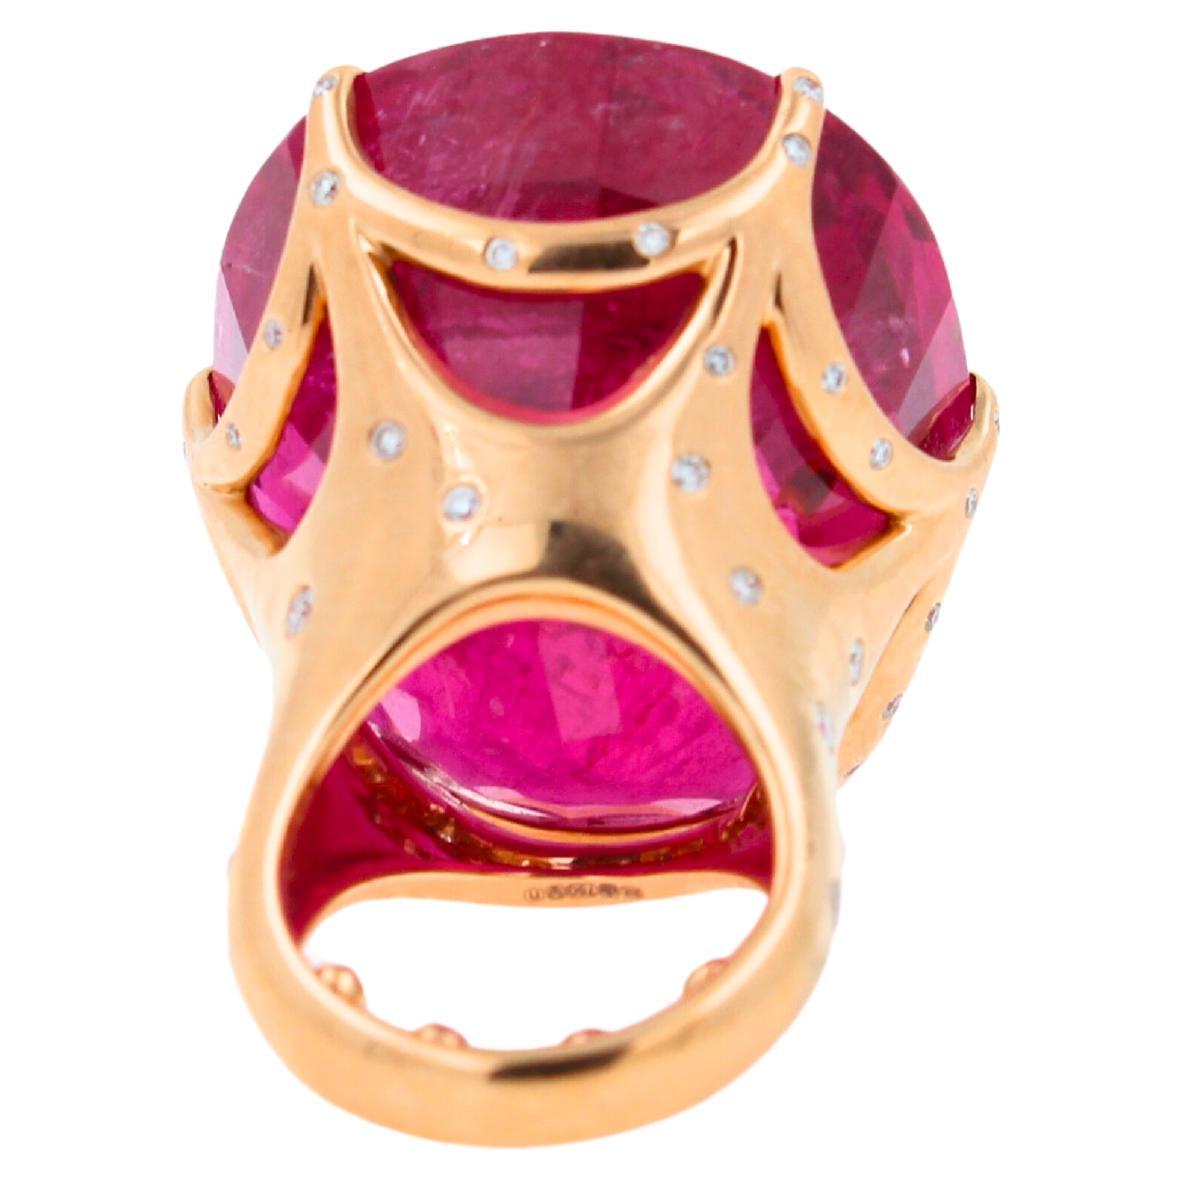 Huge Unique 110 Carats Red Pink Maroon Rubellite 18k Rose Gold Diamond Ring For Sale 2